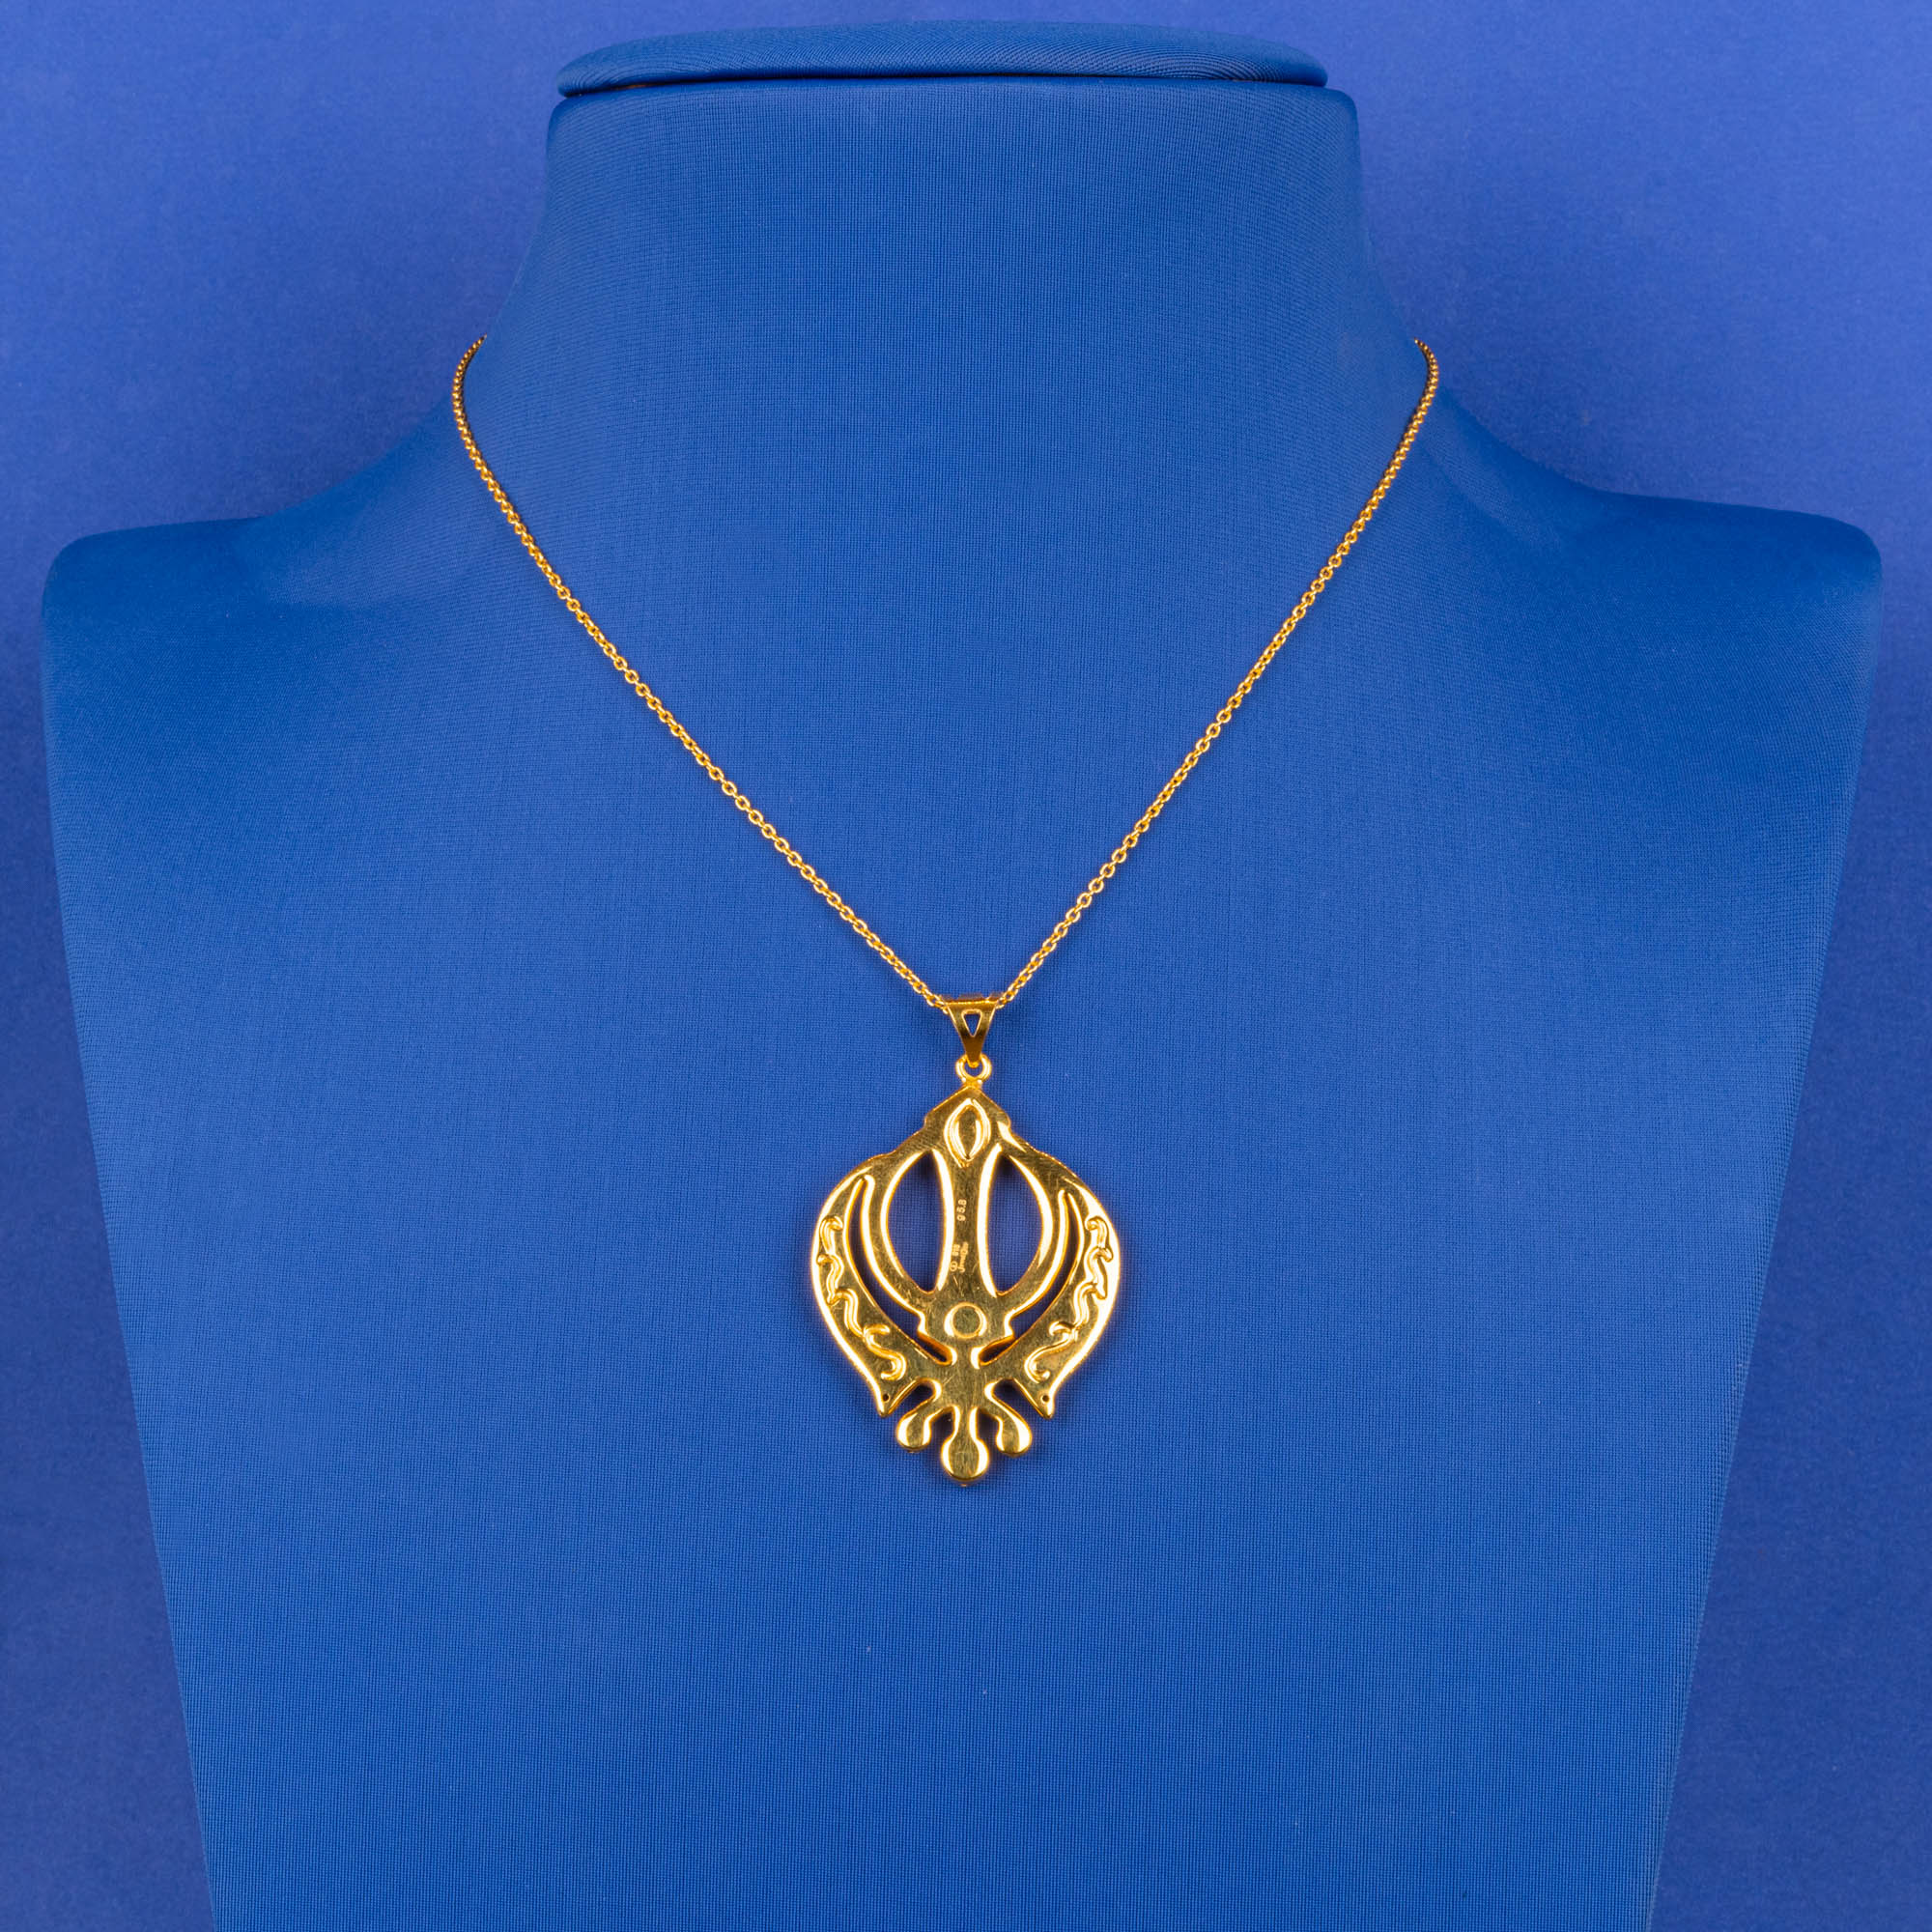 Glowing Grace: Handmade 22K Yellow Gold Sikh Khanda Pendant with Exquisite Craftsmanship (chain not included)